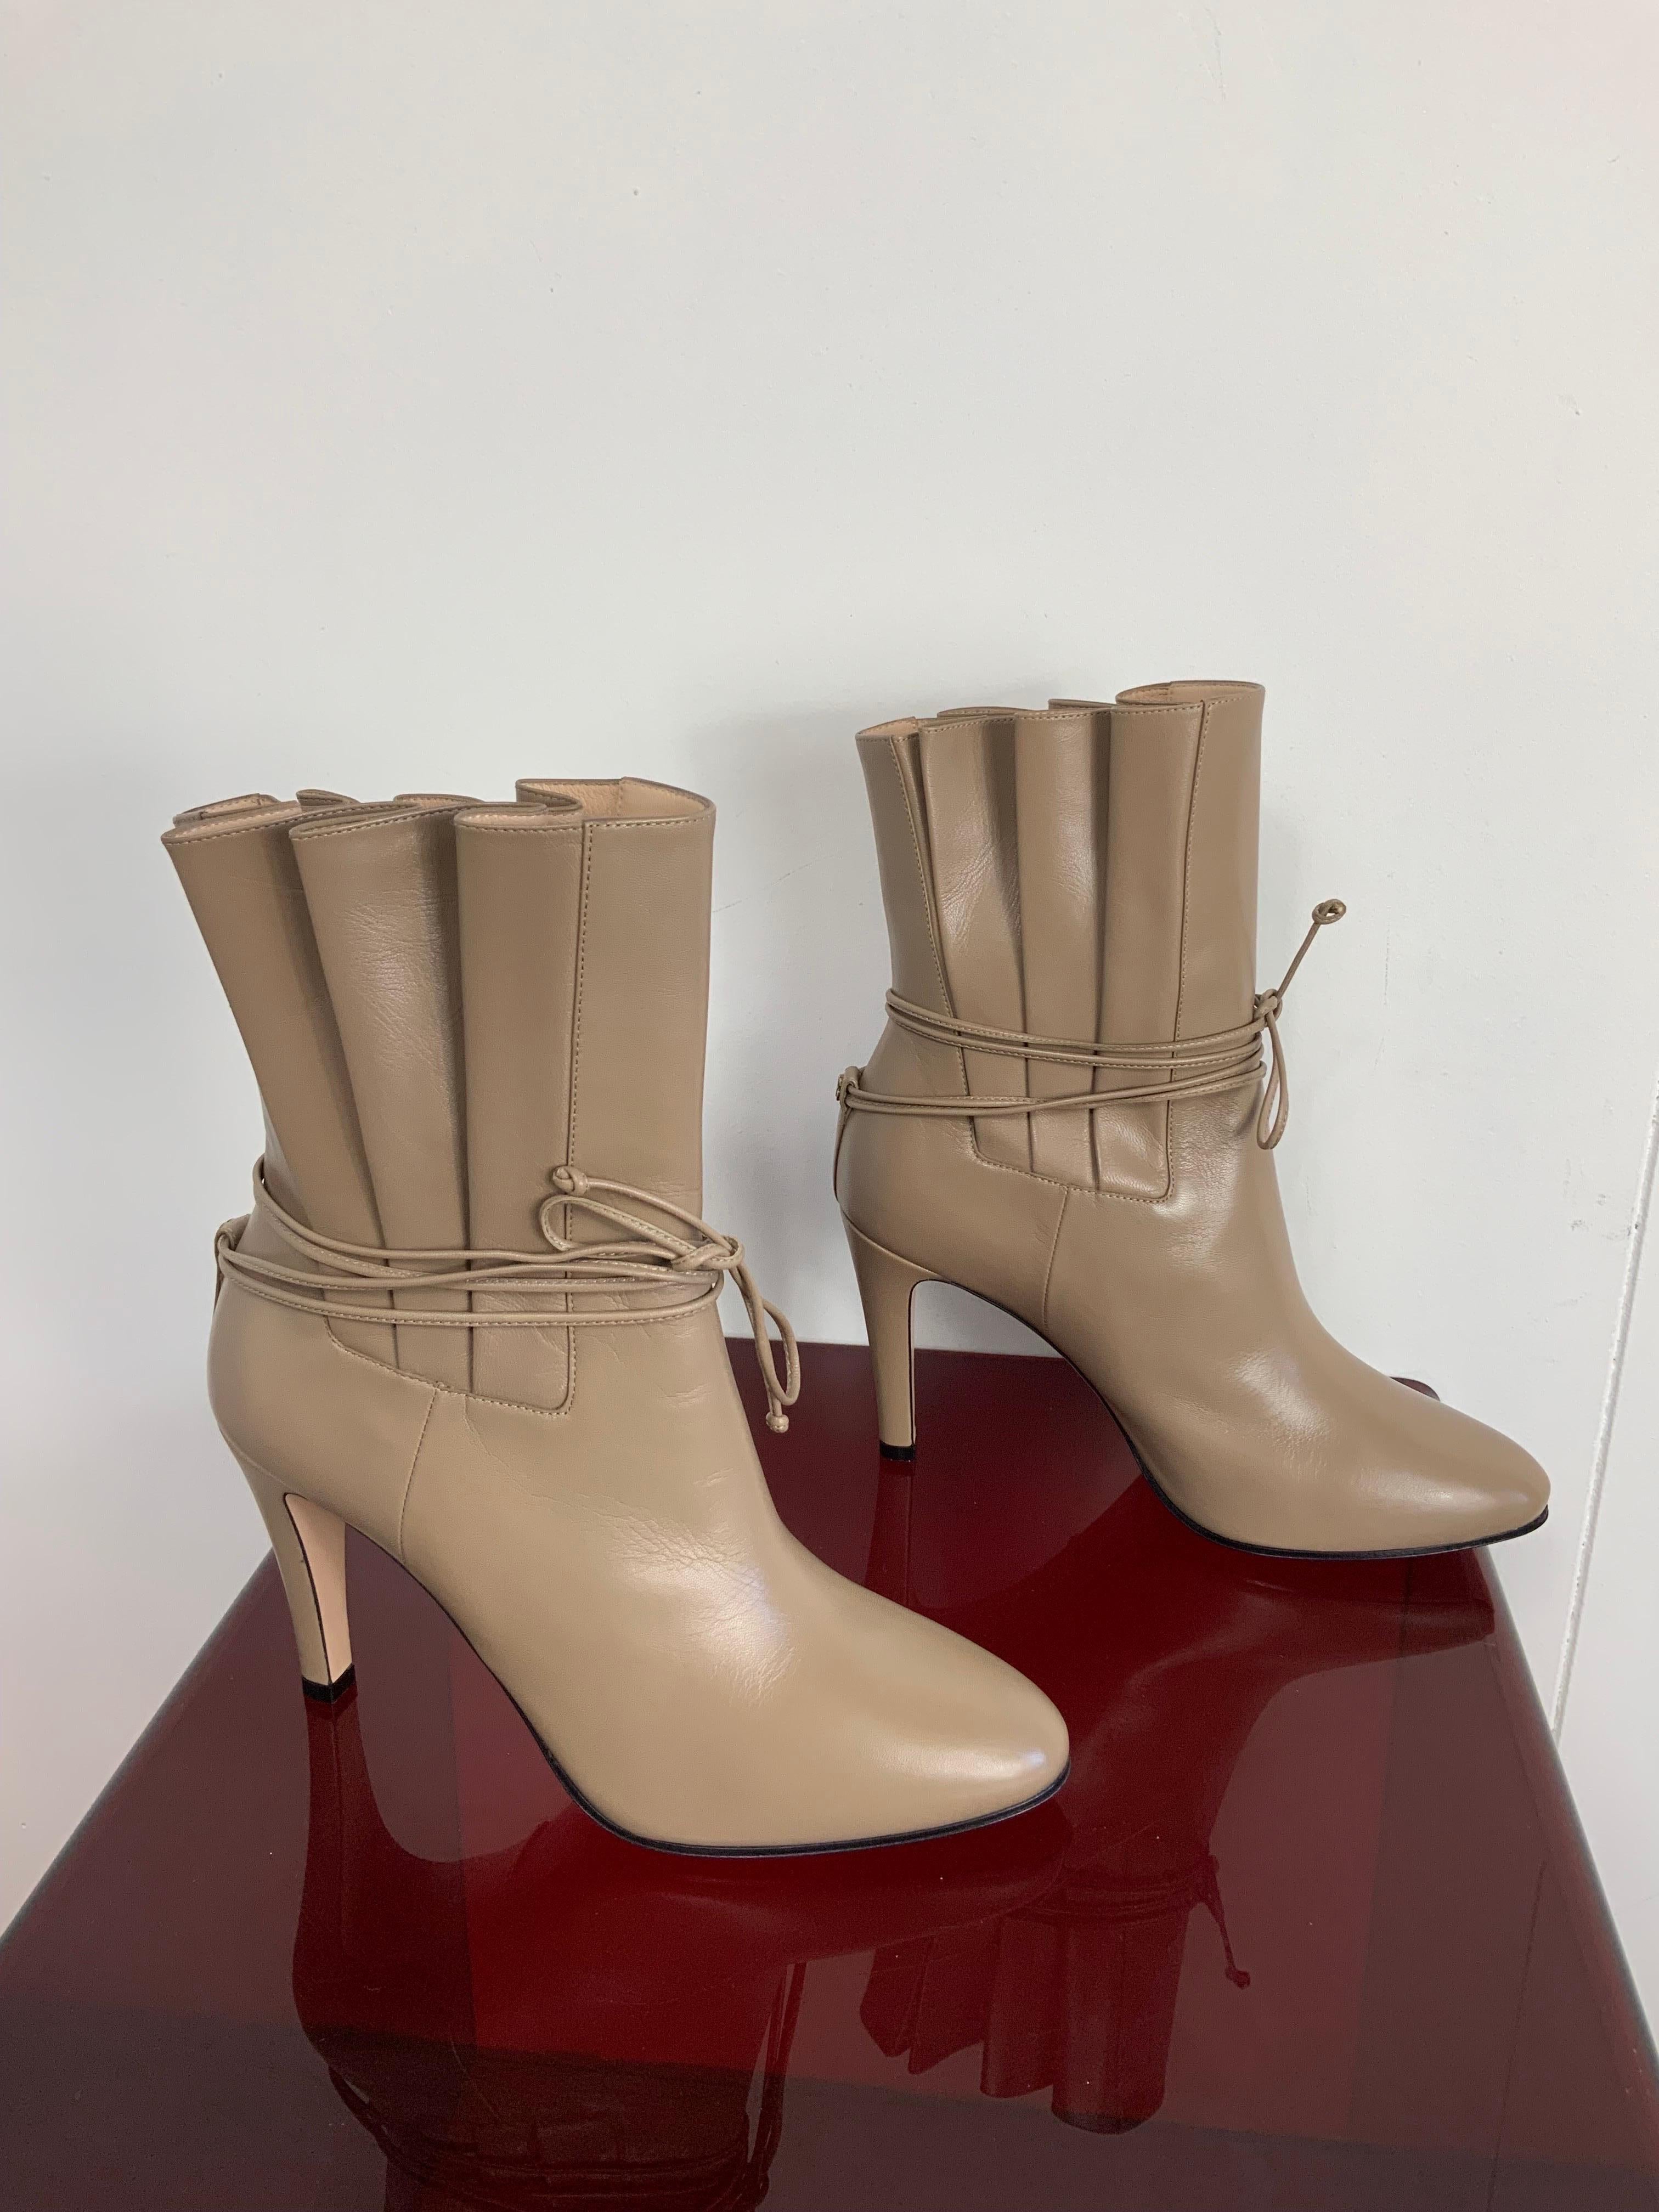 GUCCI BOOTS.
In dove-gray leather.
Italian number 39.
The heel measures 10 cm
The boot is 27 cm high overall
New, never used.
It has original dust bag.